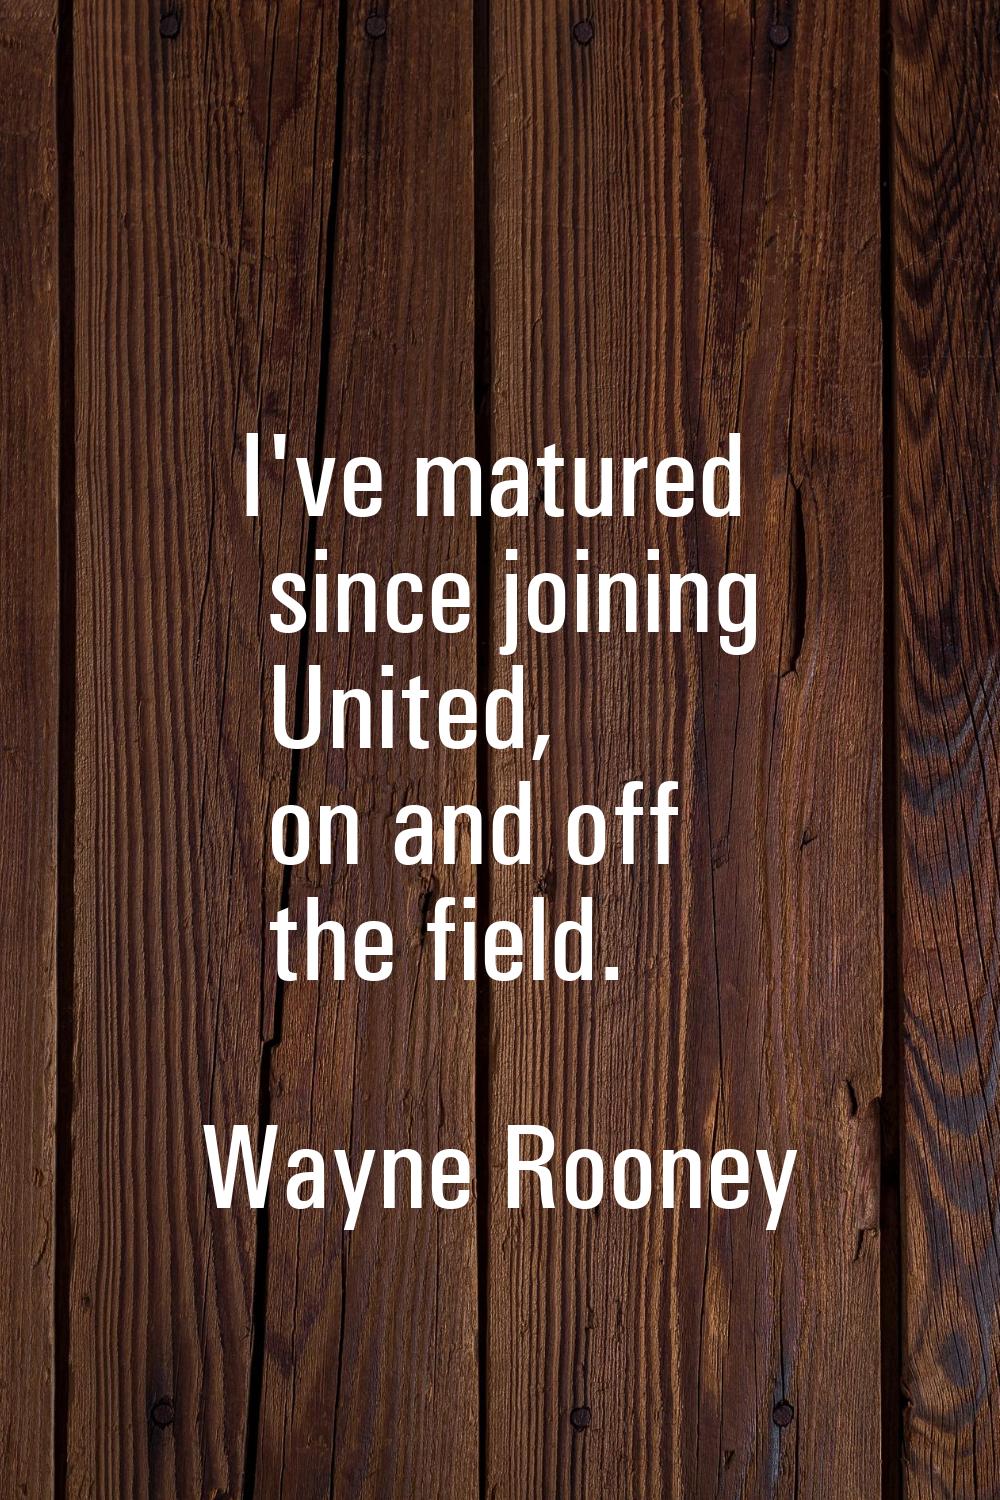 I've matured since joining United, on and off the field.